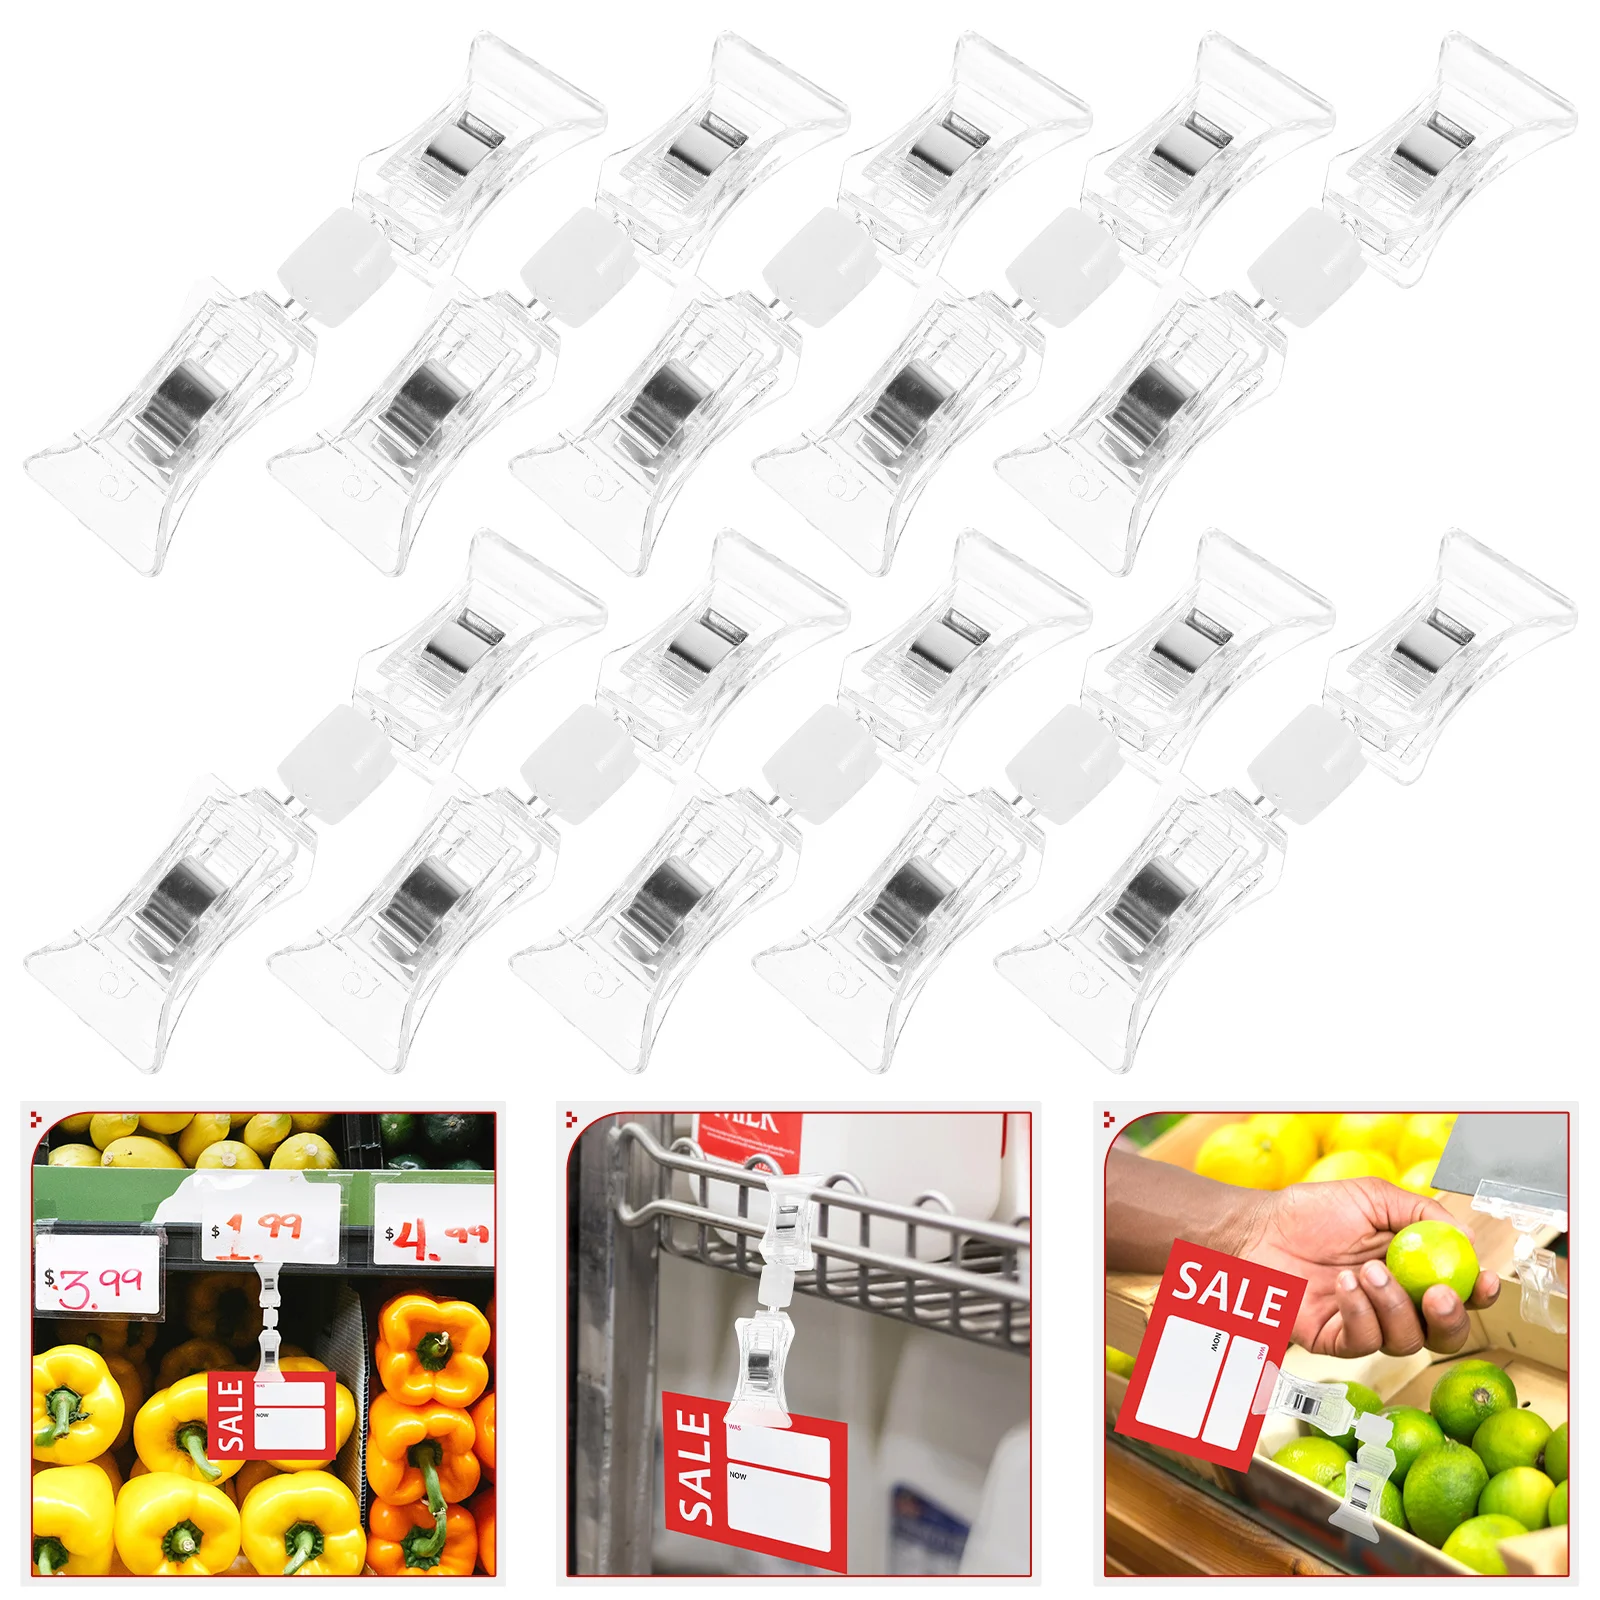 10 Pcs Advertising Double-headed Clip Price Tag Holder Clips Sign Holders Crystal 10 pcs advertising double headed clip price tag holder clips sign holders crystal